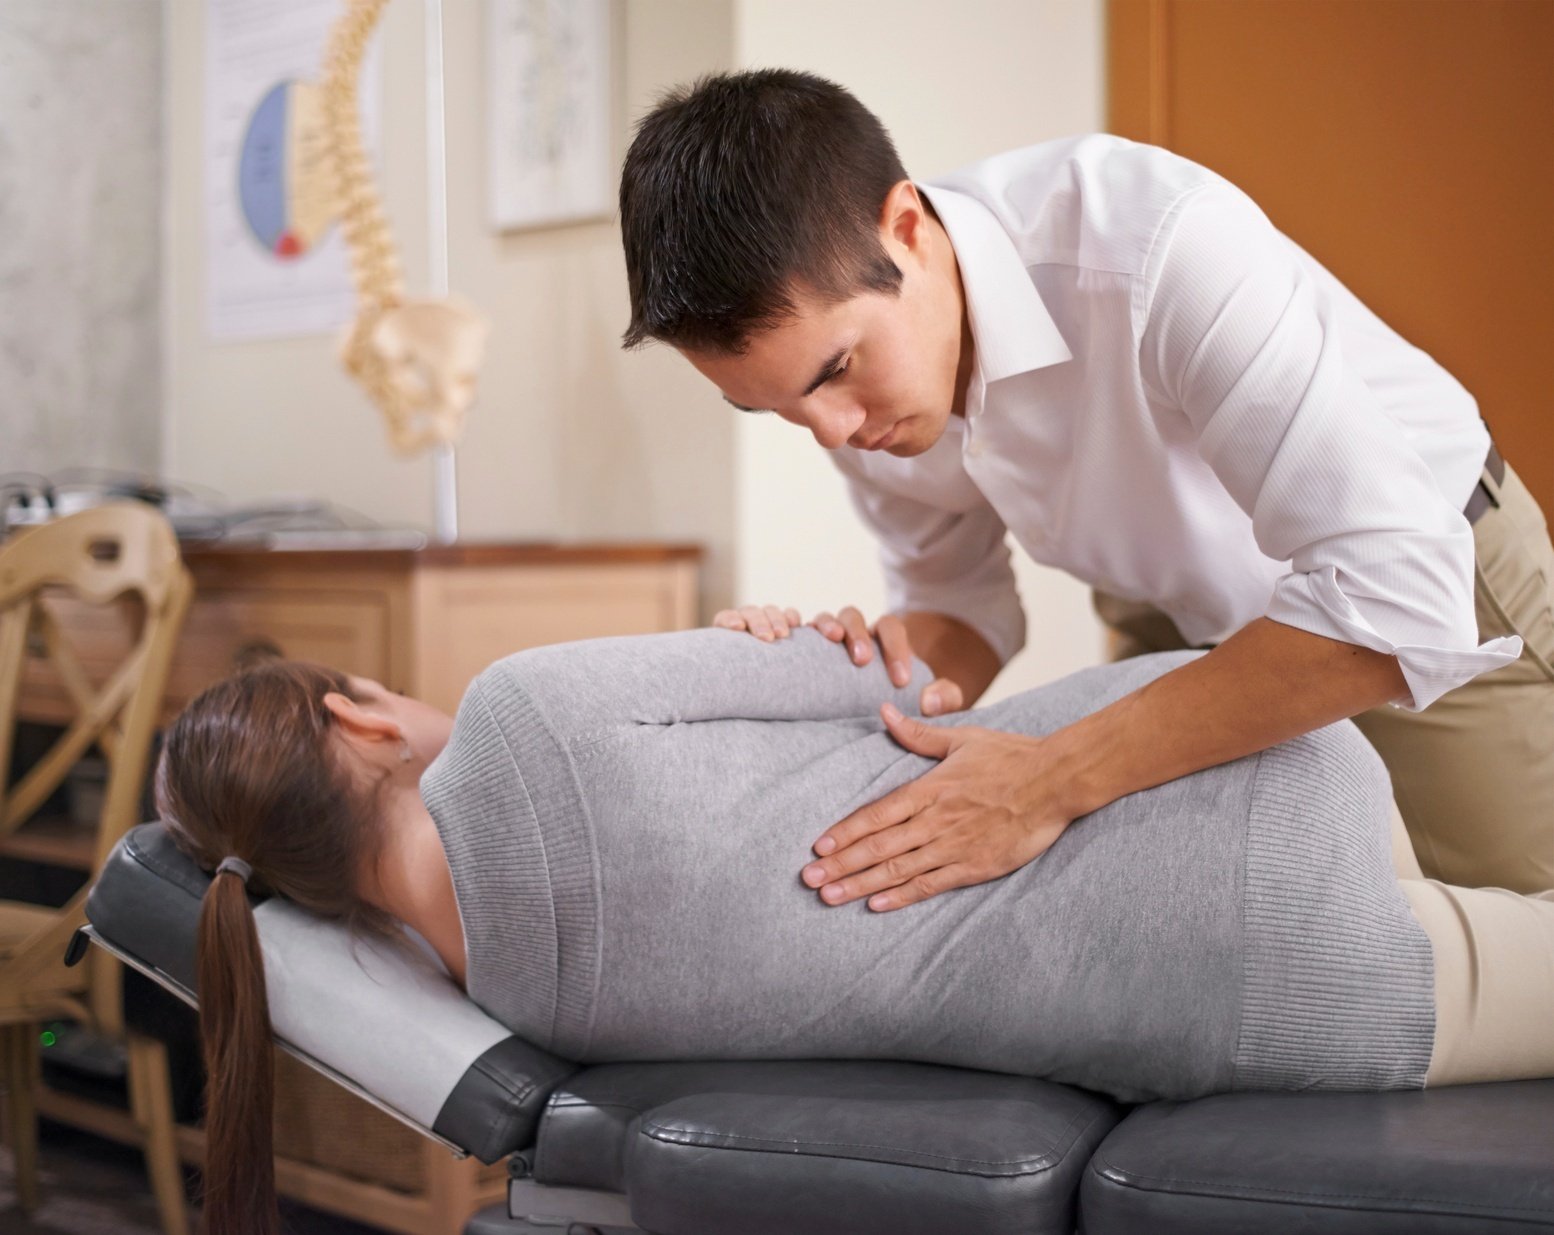 What to Do After A Chiropractic Adjustment